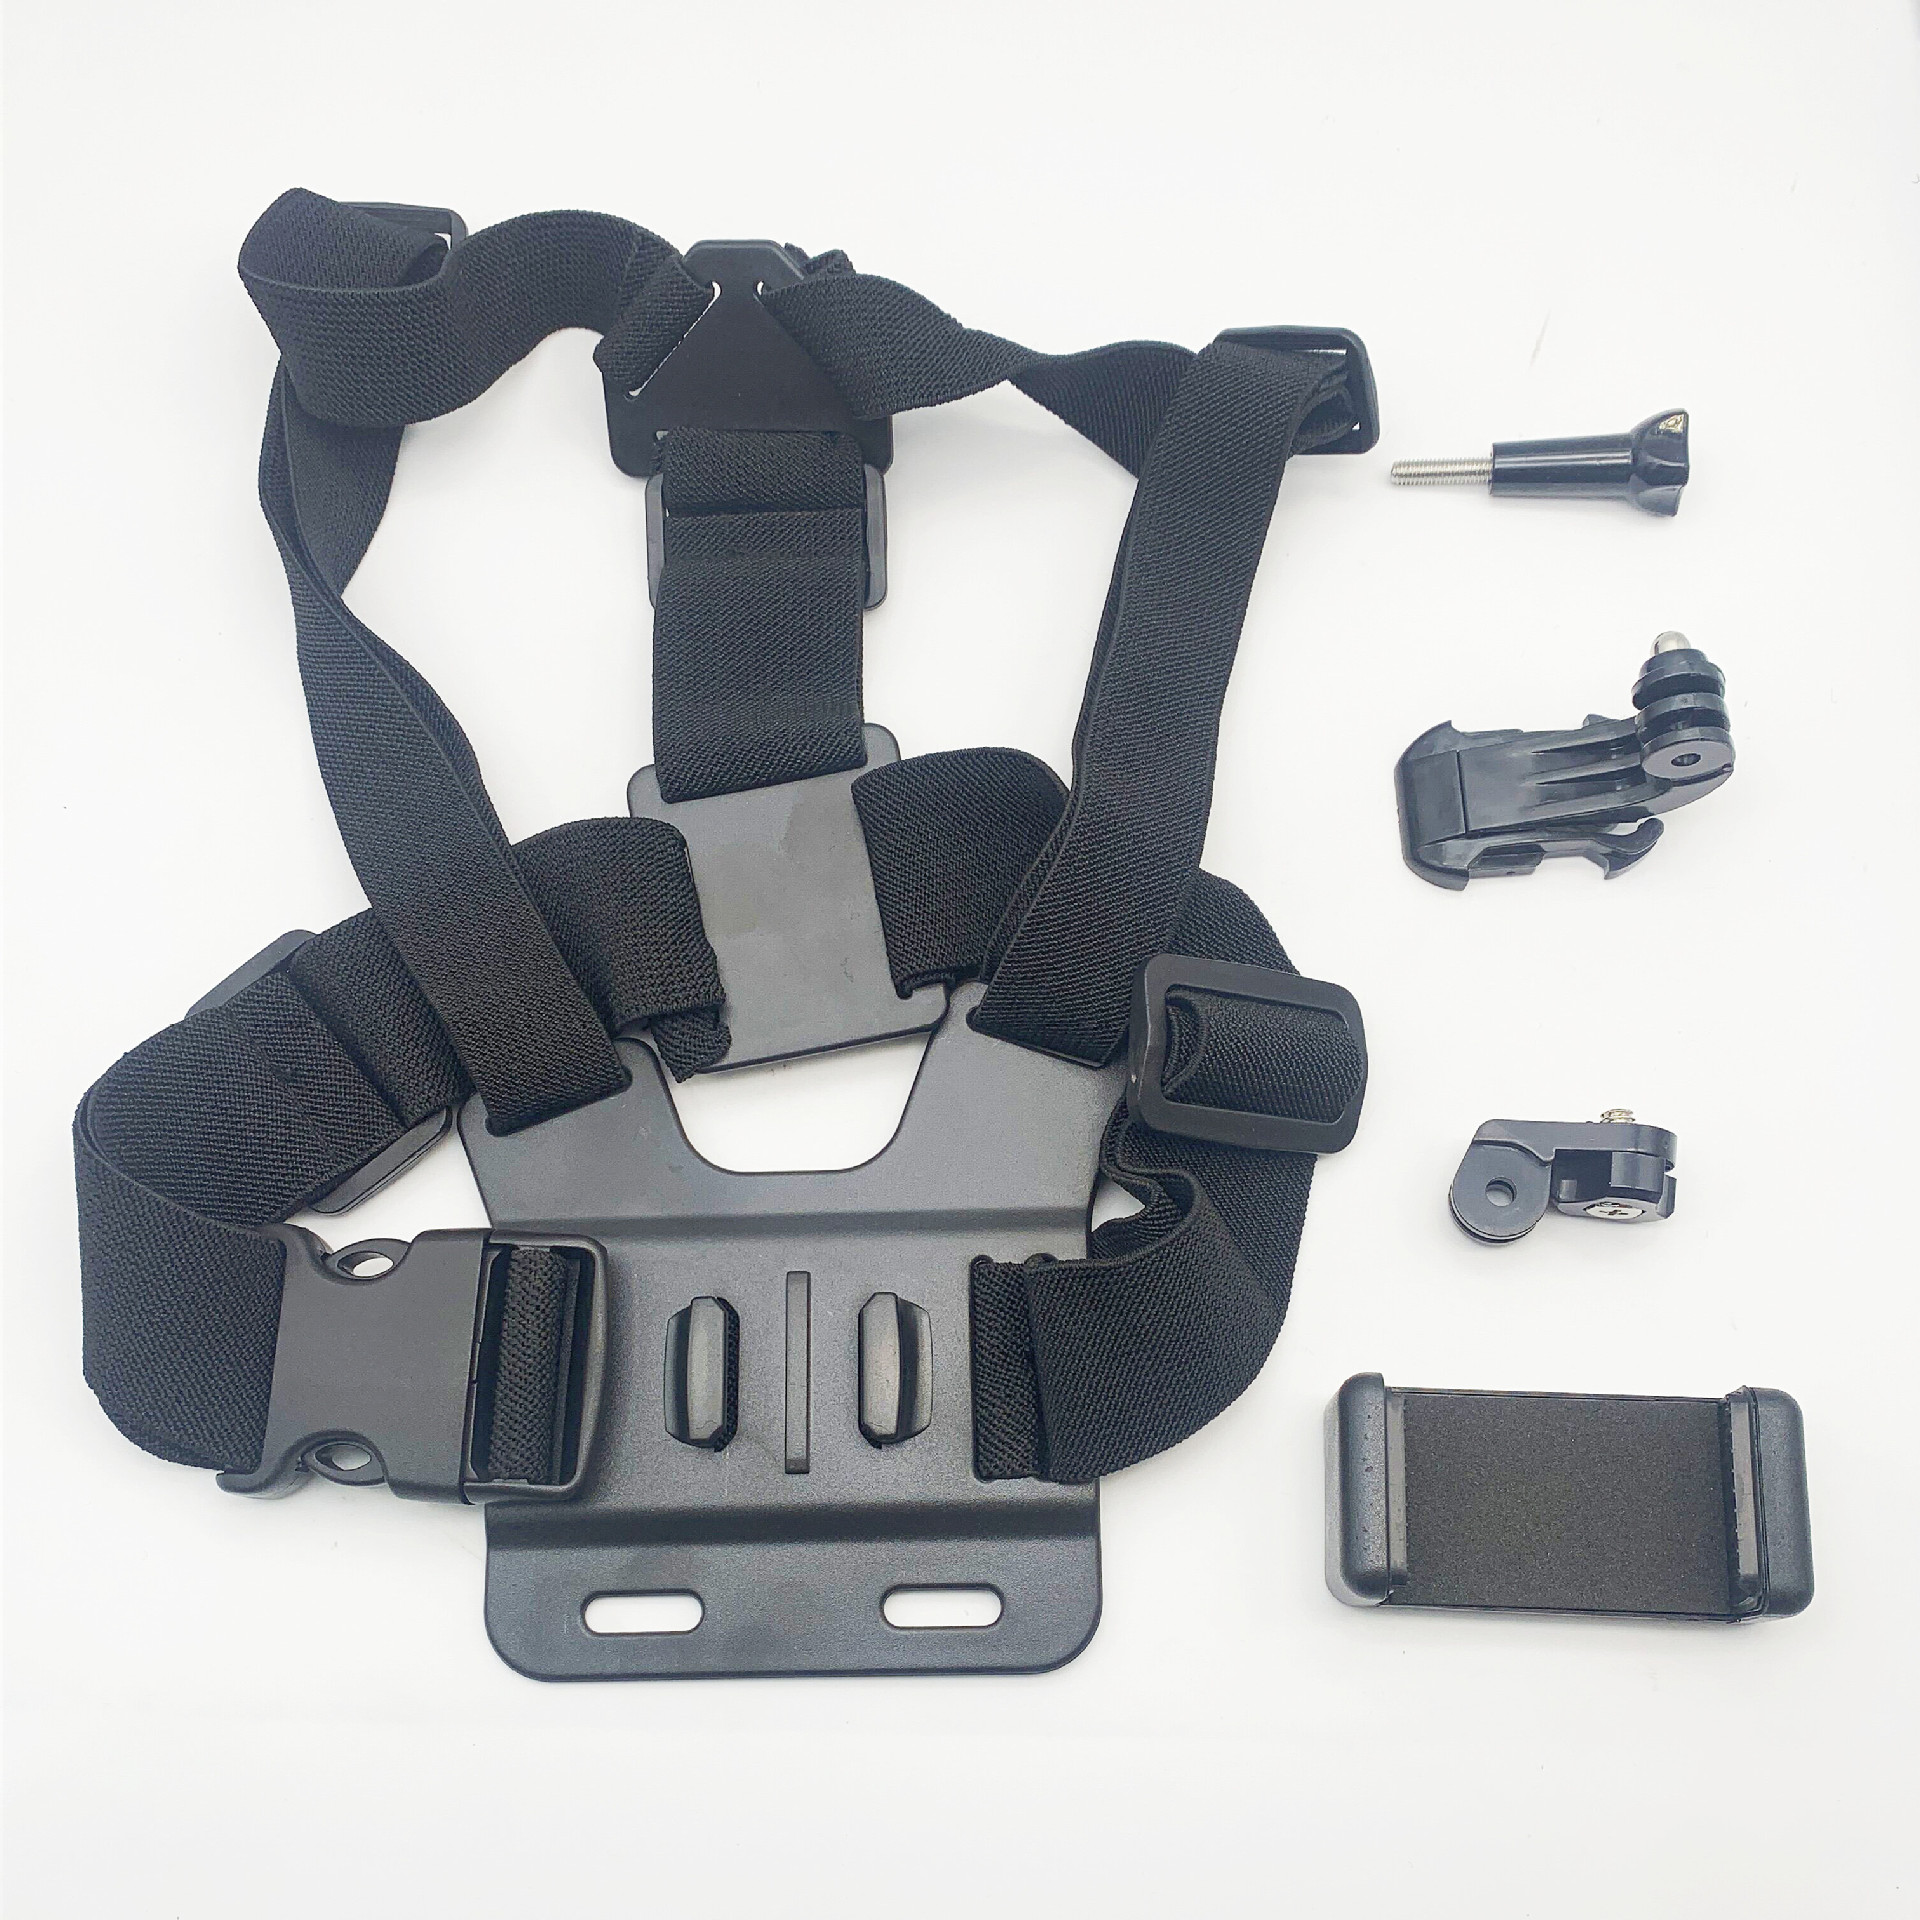 First Person Perspective Shooting Accessories Sports Camera Chest Shooting Strap Live Broadcast Outdoor Riding Mobile Phone Bracket